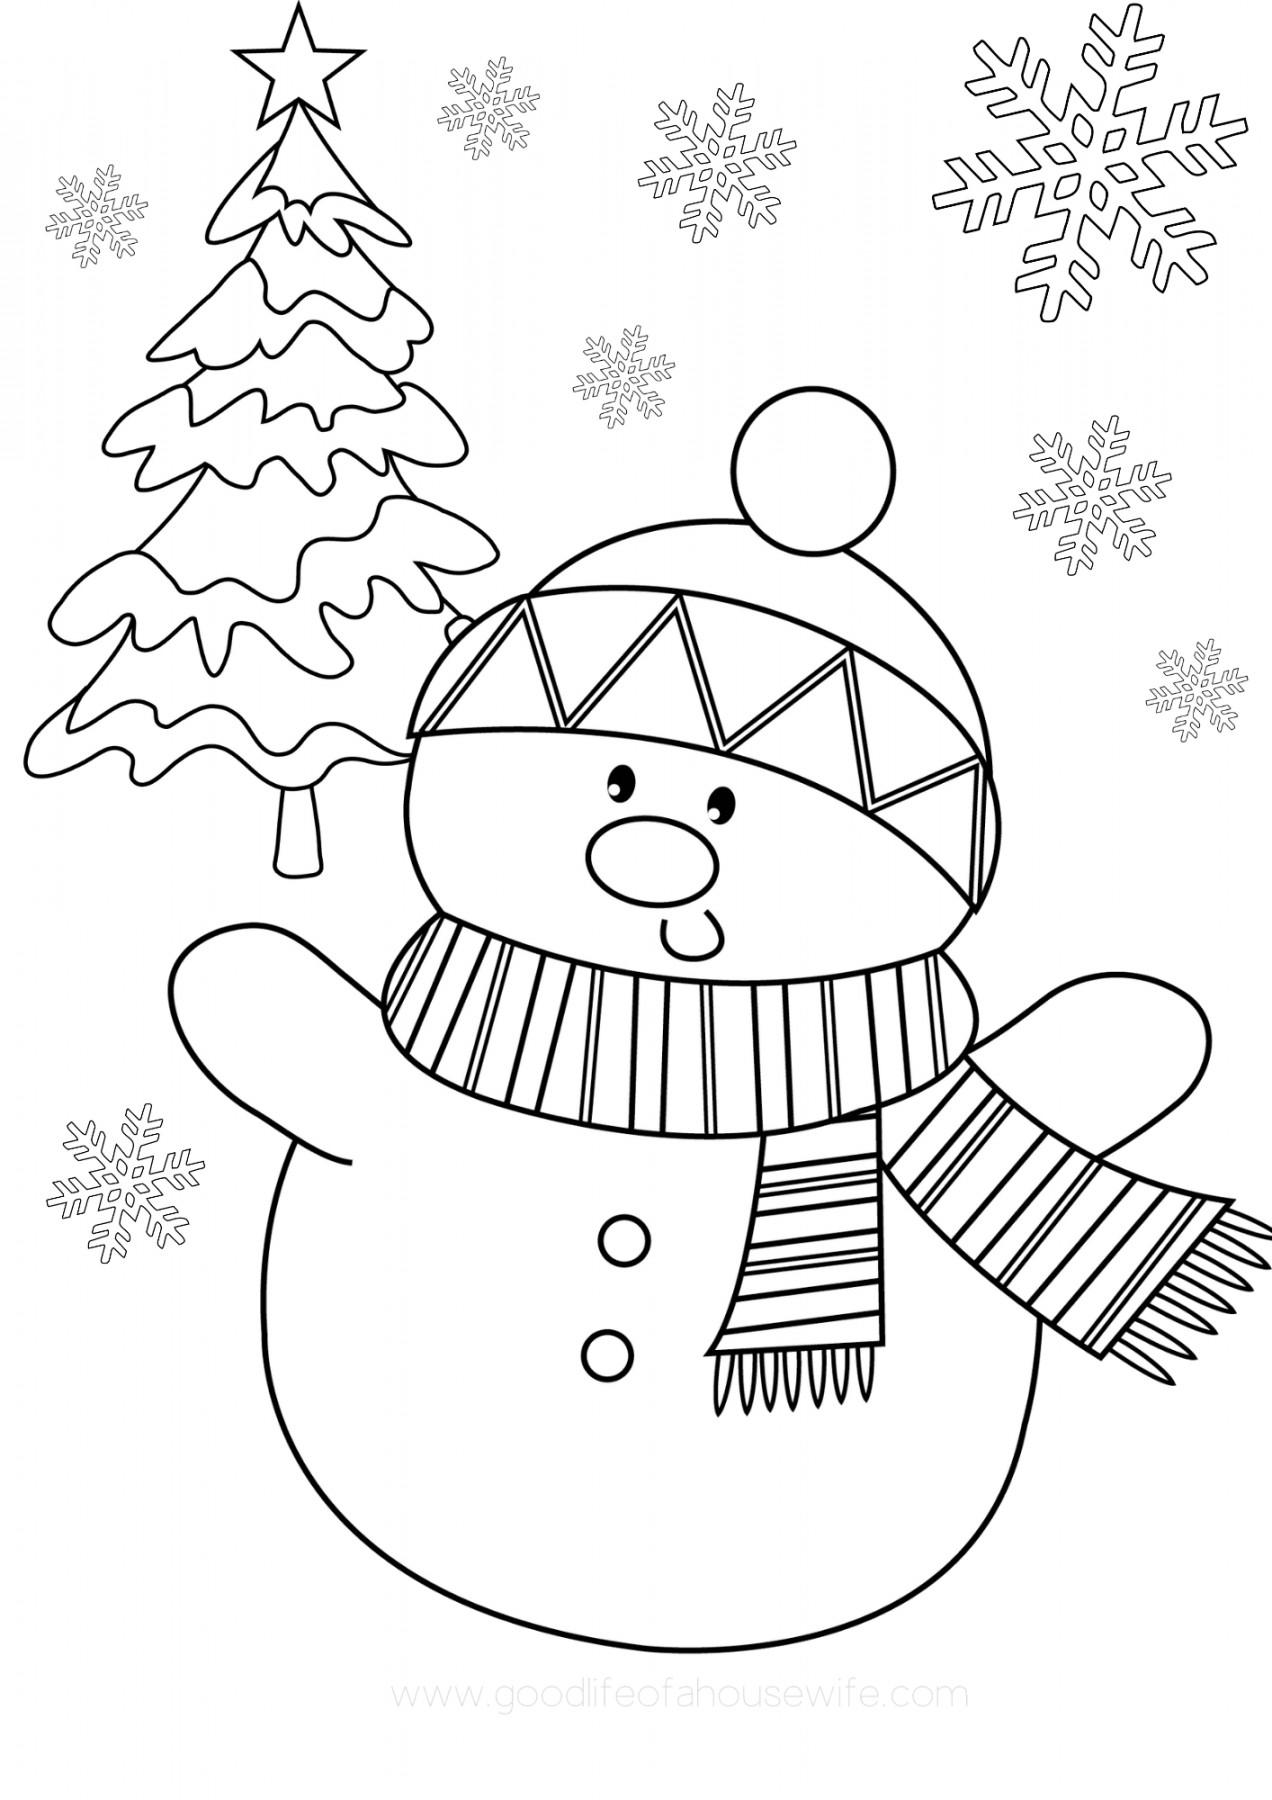 Free Printable Christmas Color Pages - Printable - Free Printable Christmas Coloring Pages - Good Life of a Housewife